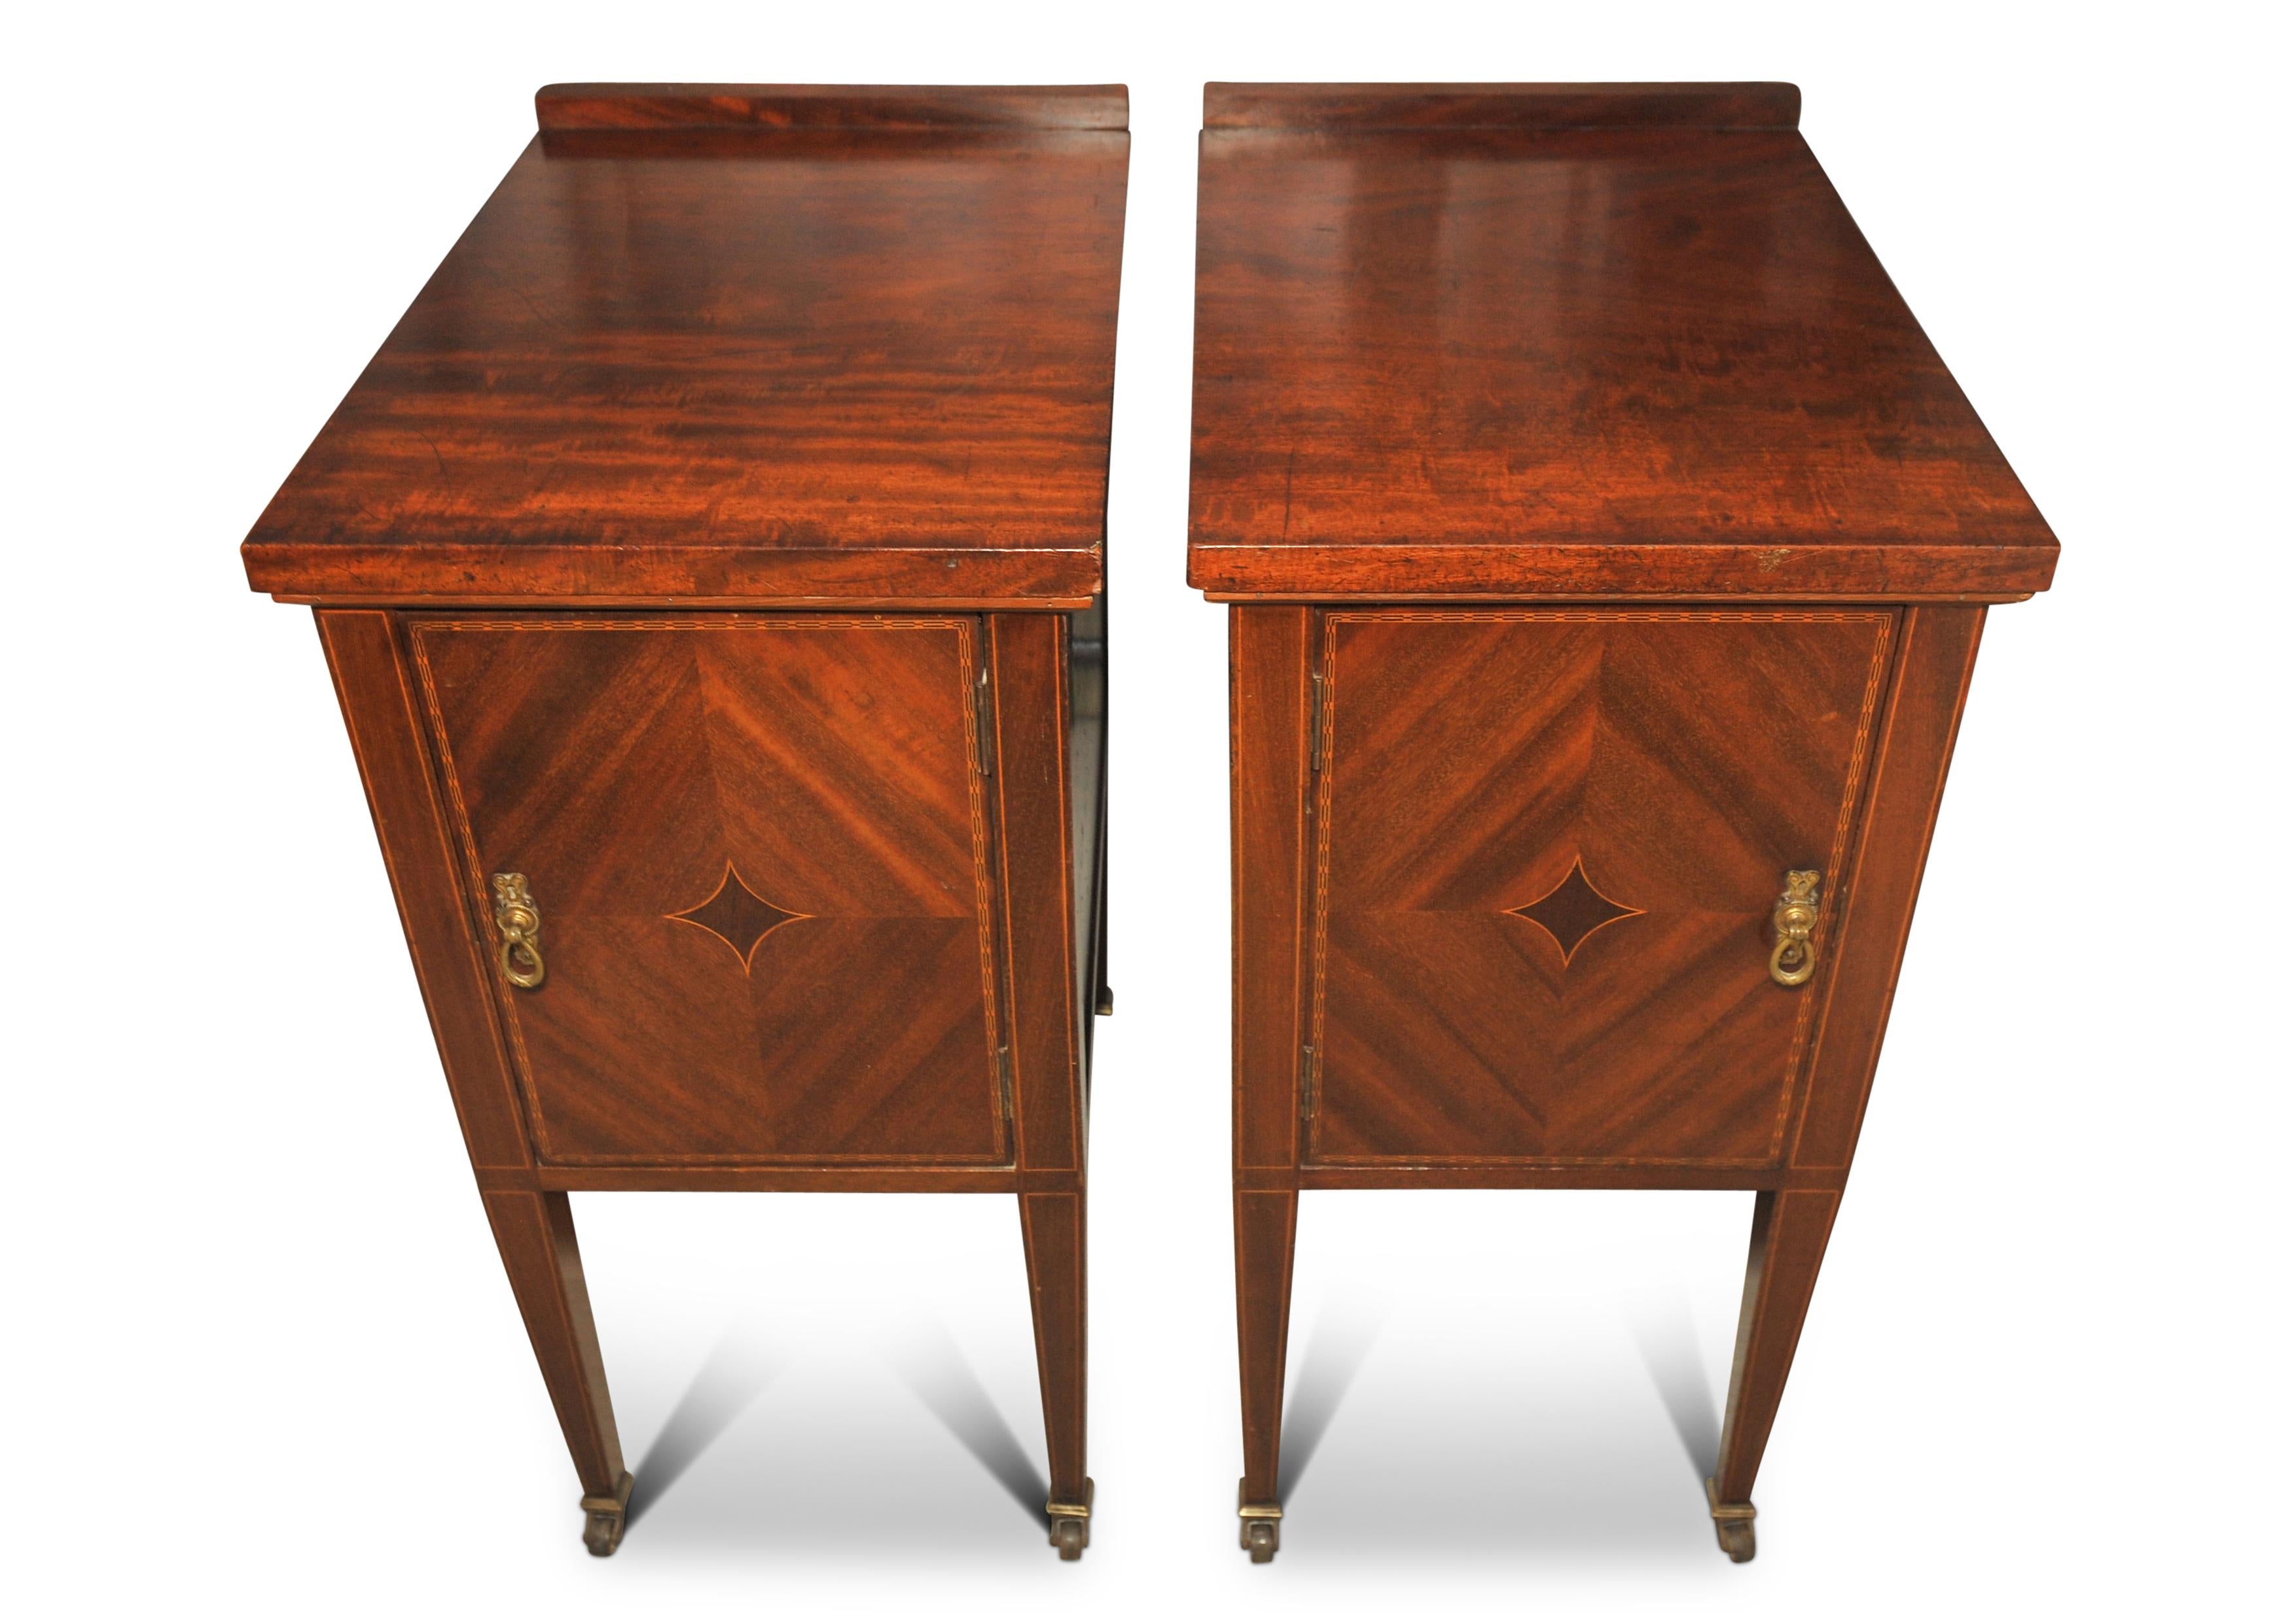 Pair of Edwardian Handcrafted Flame Mahogany Veneer Nightstands / Pot Cupboards In Good Condition For Sale In High Wycombe, GB